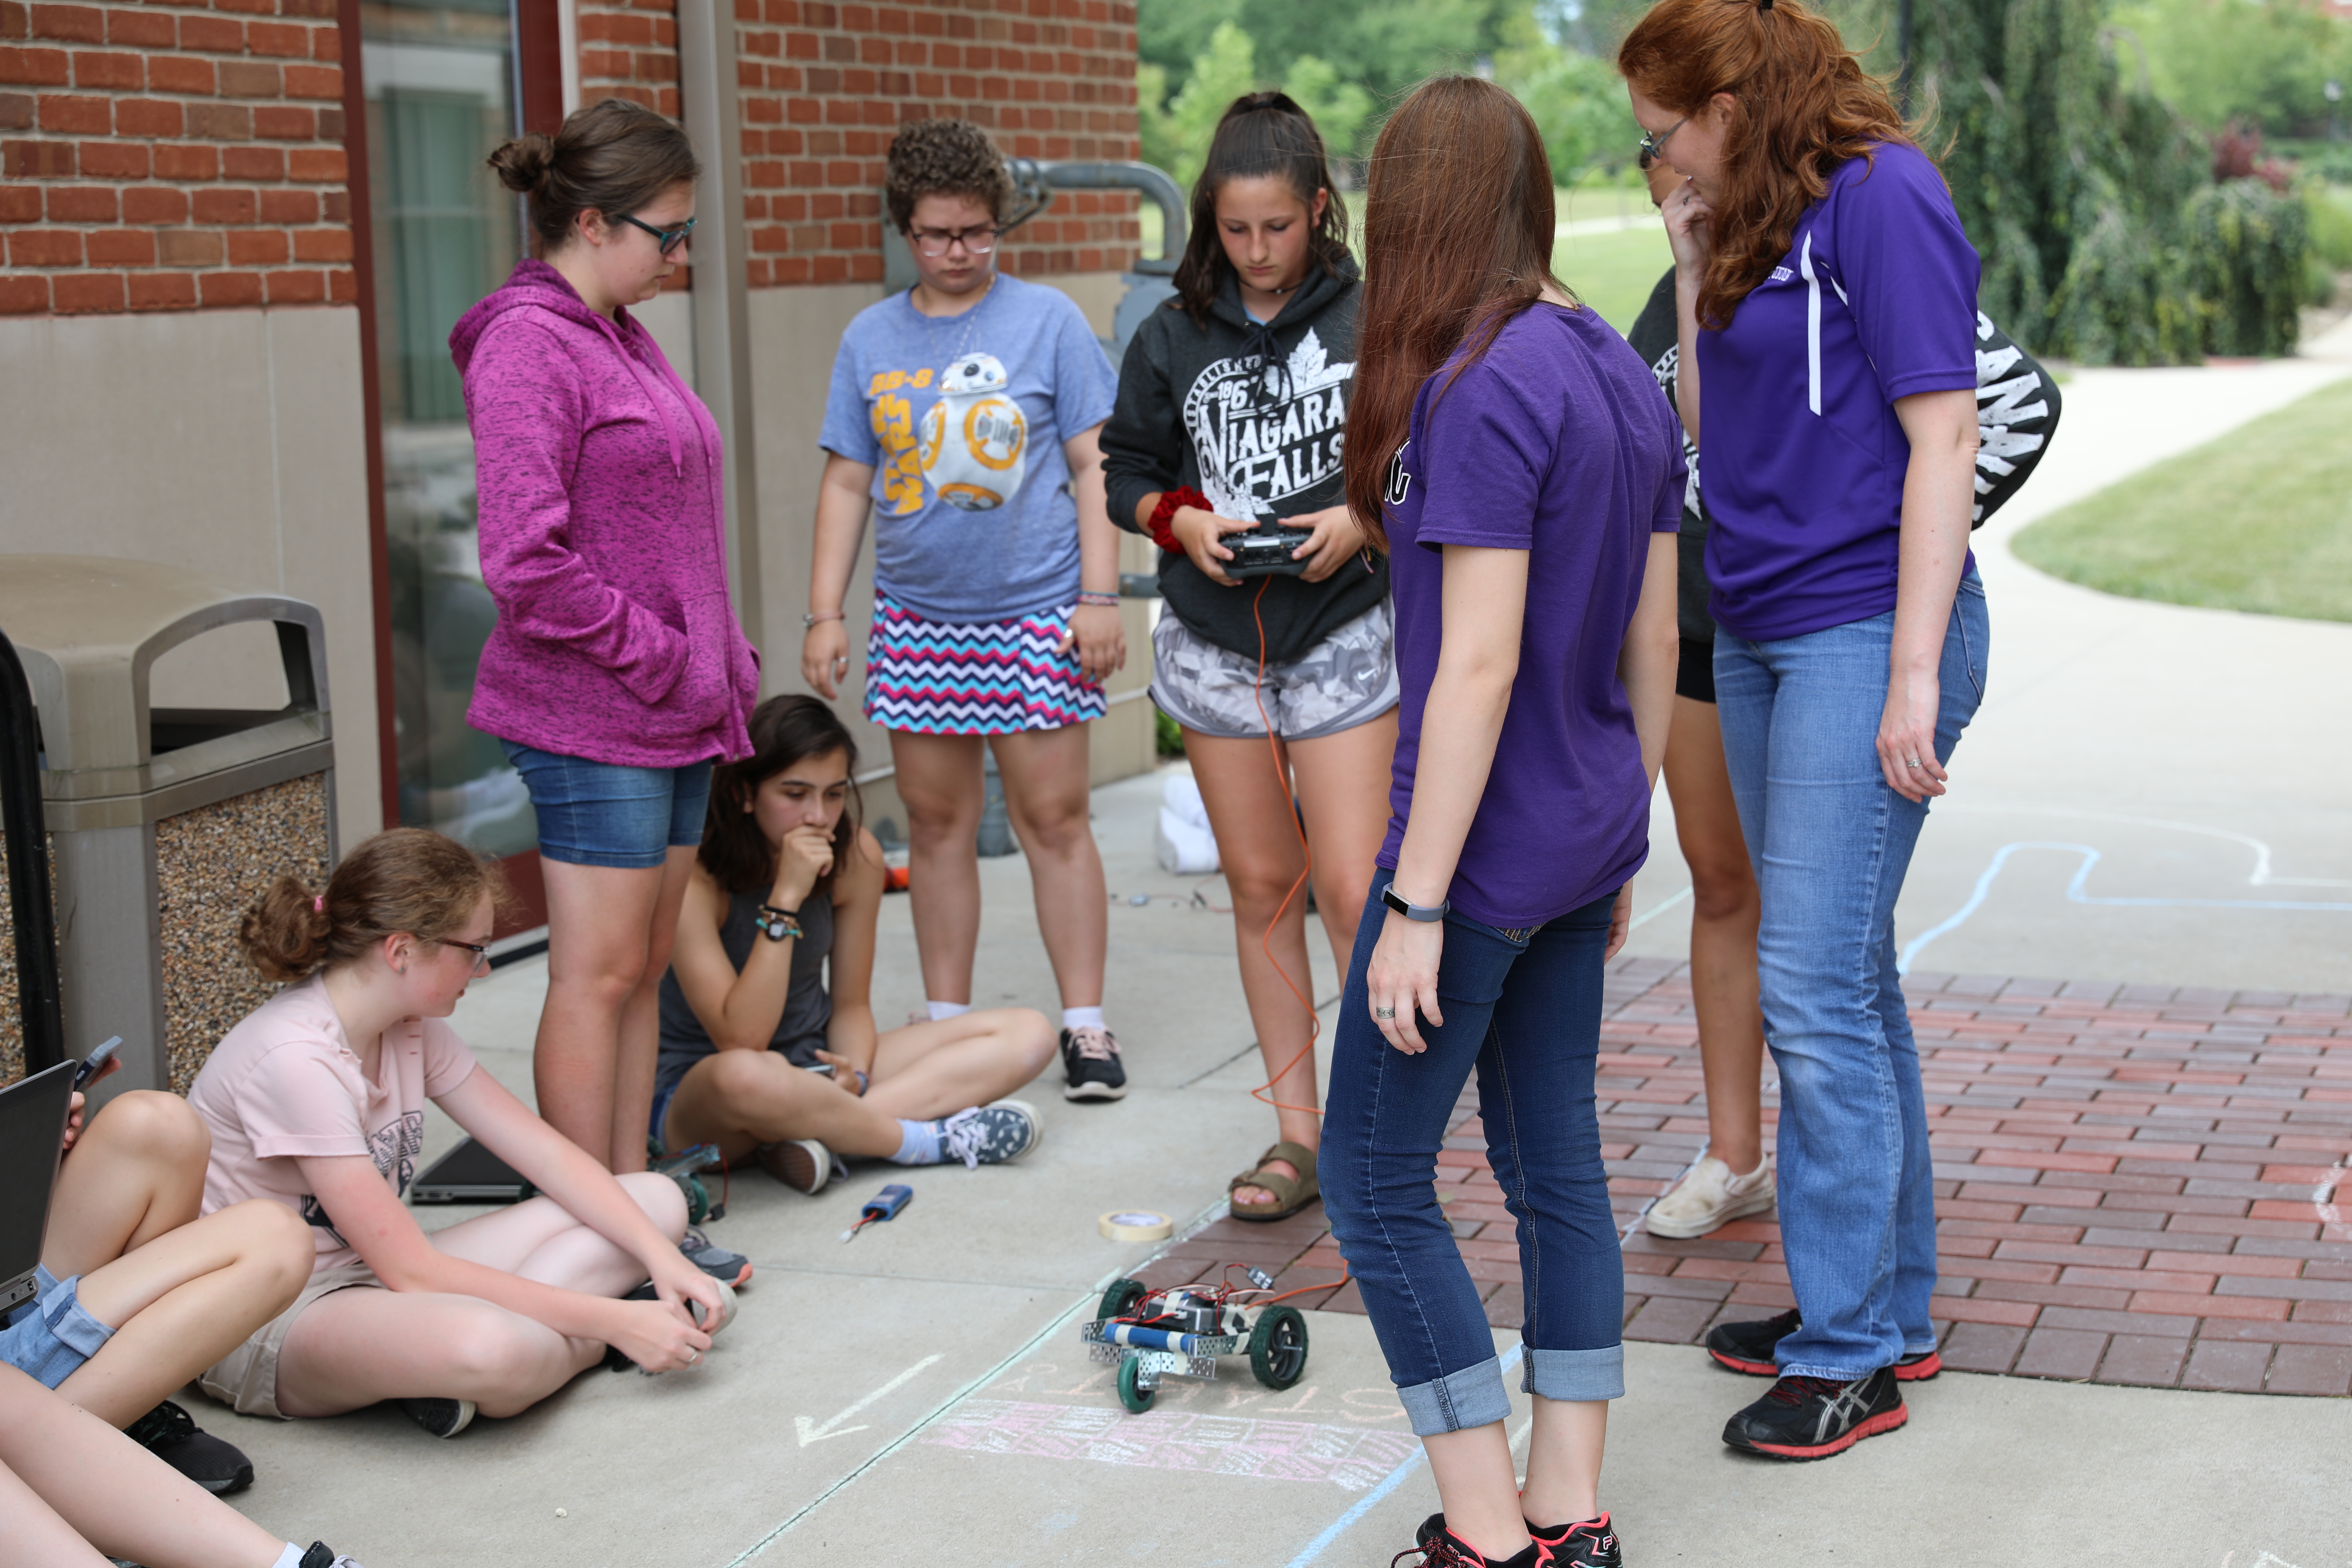 Action shot of the “Robot Design Challenge” where campers built their own robot car and programmed the car to race through an obstacle course in a timed competition